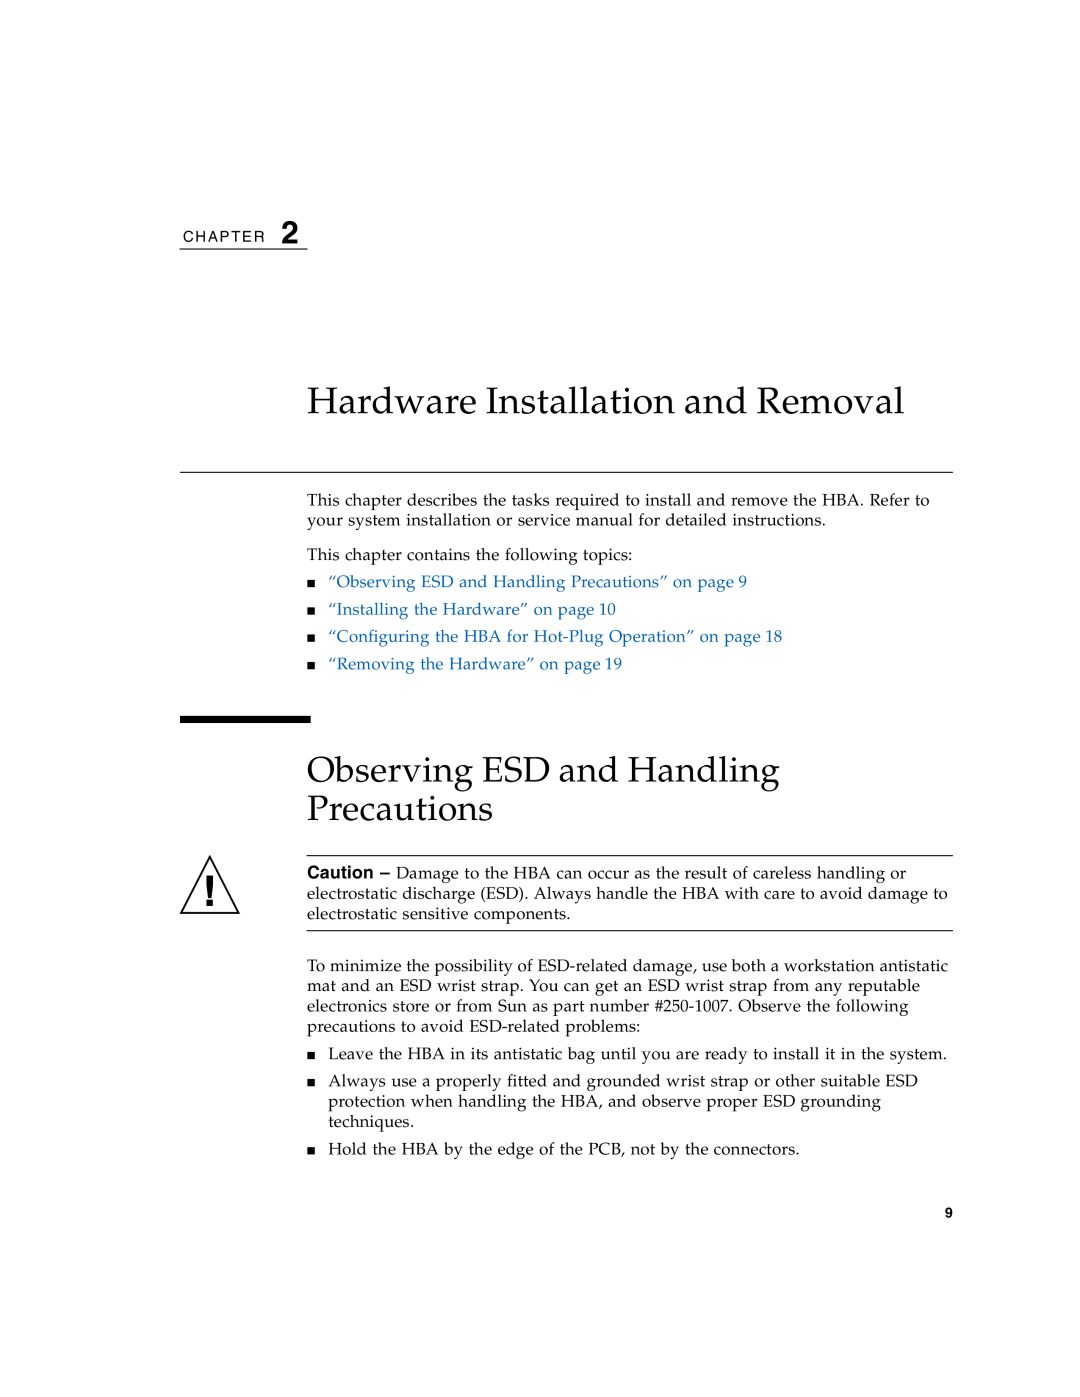 Sun Microsystems SG-XPCIE2FCGBE-E-Z manual Hardware Installation and Removal, Observing ESD and Handling Precautions 